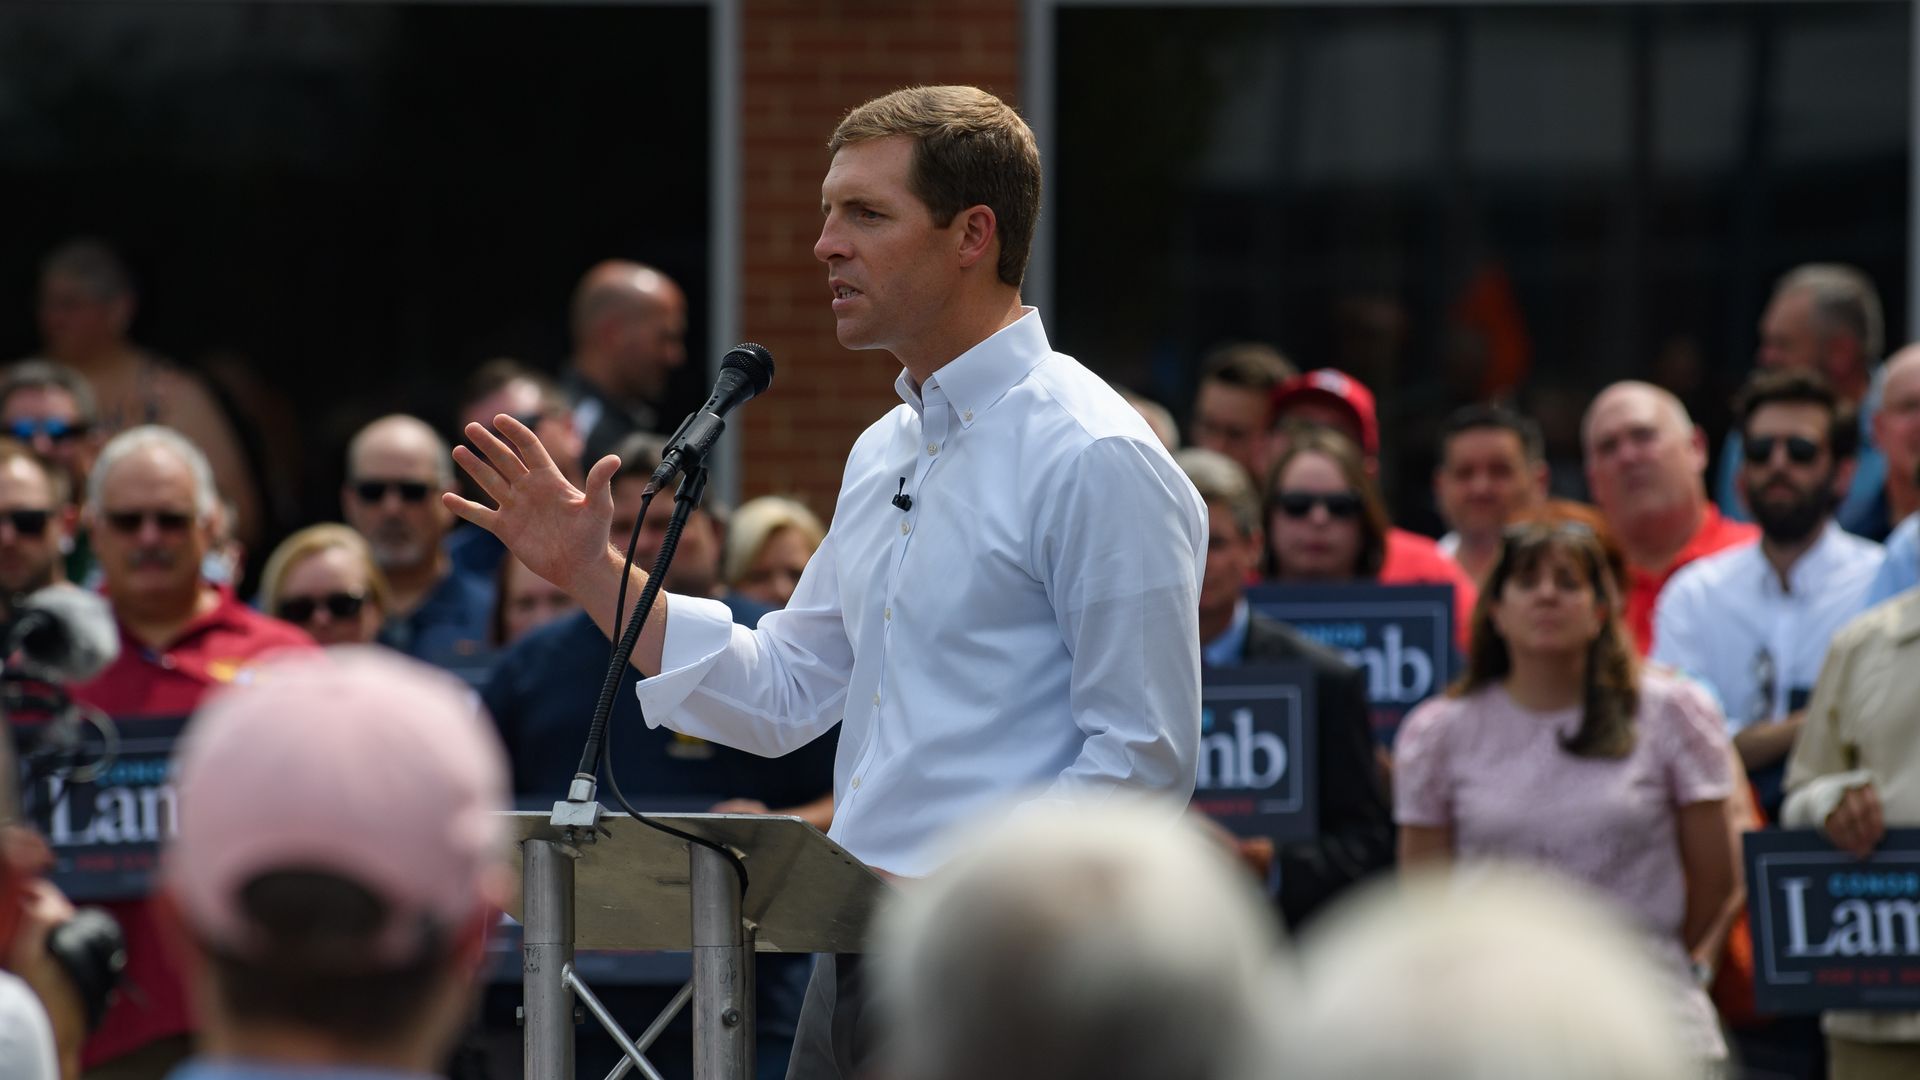 U.S. Rep. Conor Lamb  announces his candidacy for the United States Senate on August 6, 2021 in Pittsburgh, Pennsylvania. Photo: Jeff Swensen/Getty